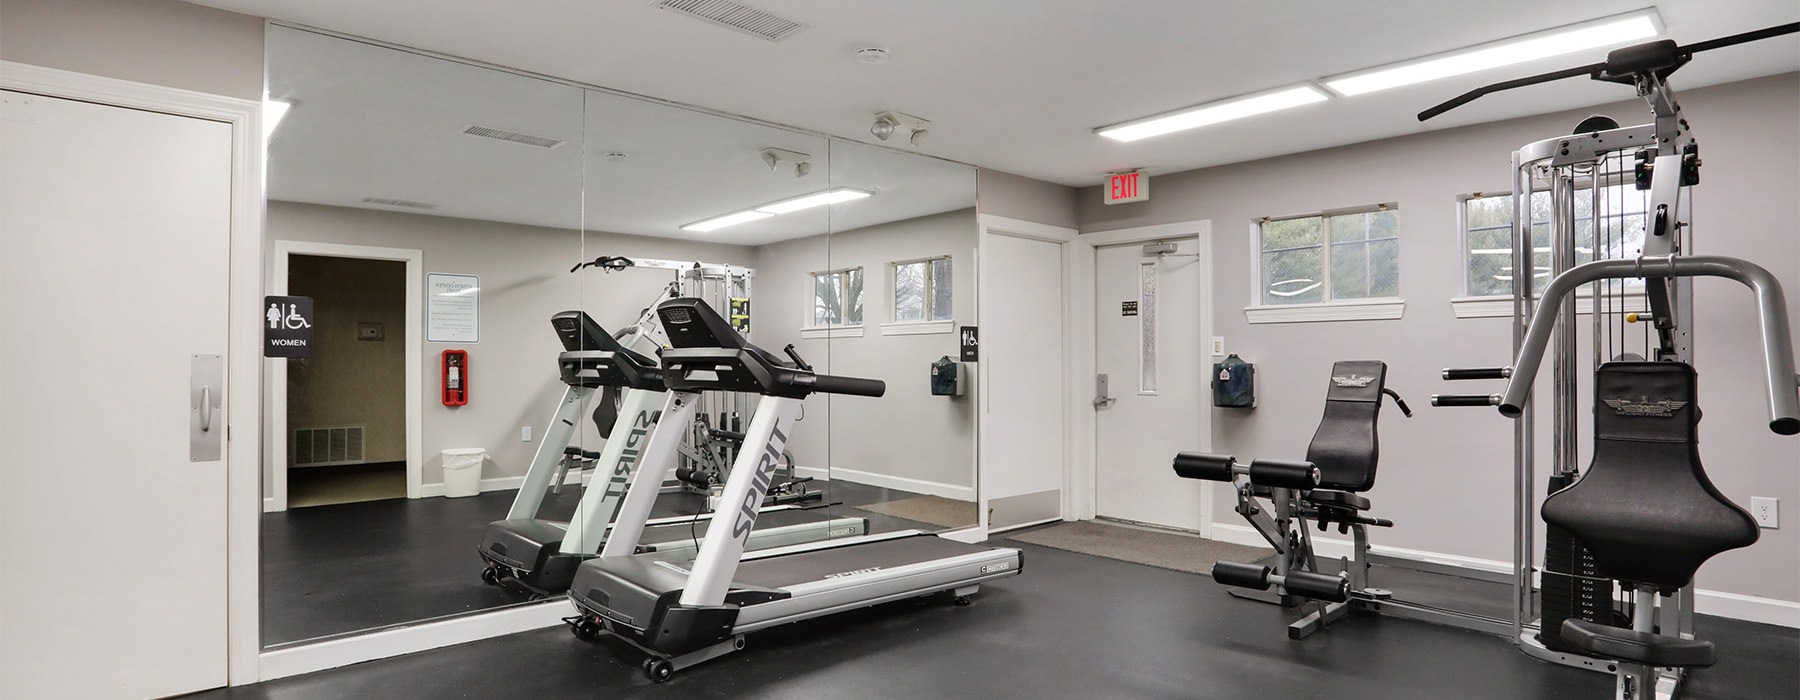 fitness center with large mirrors